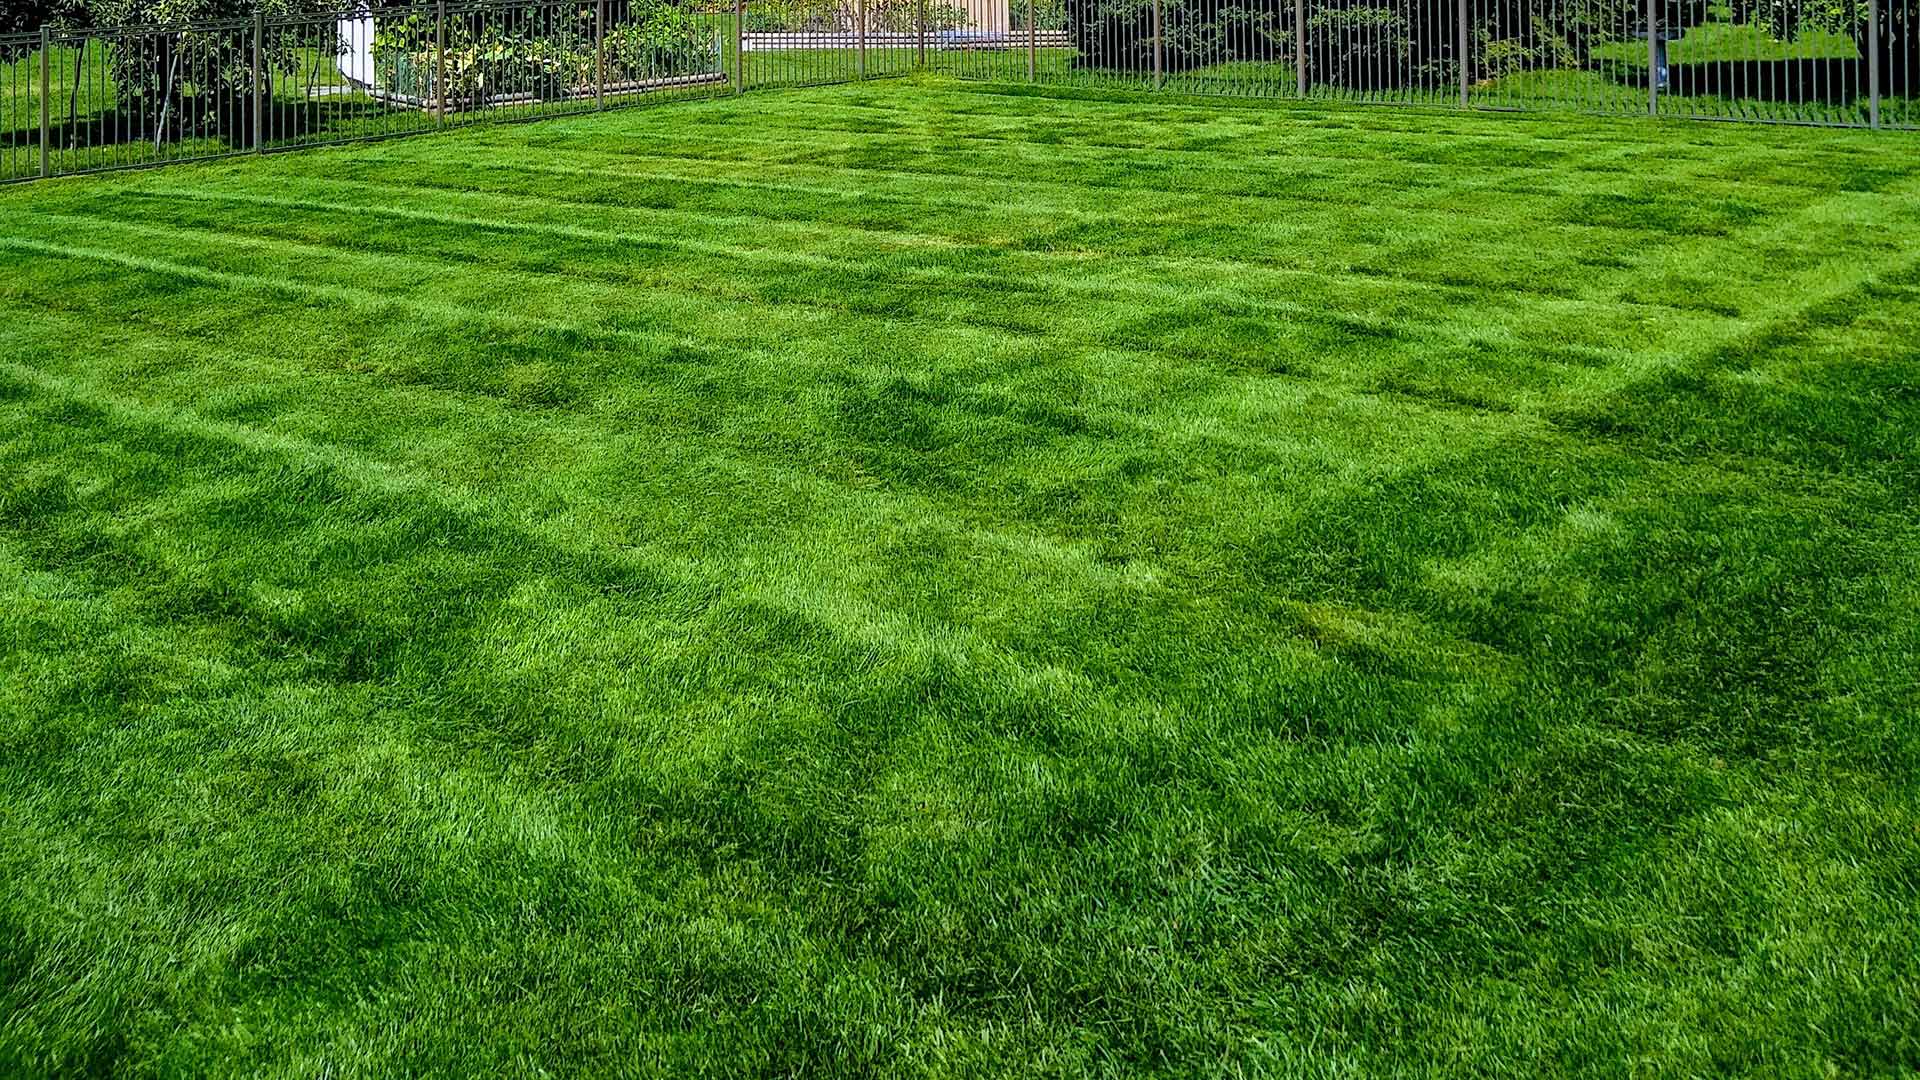 Bright green, healthy home lawn recently mowed in Macomb, MI.